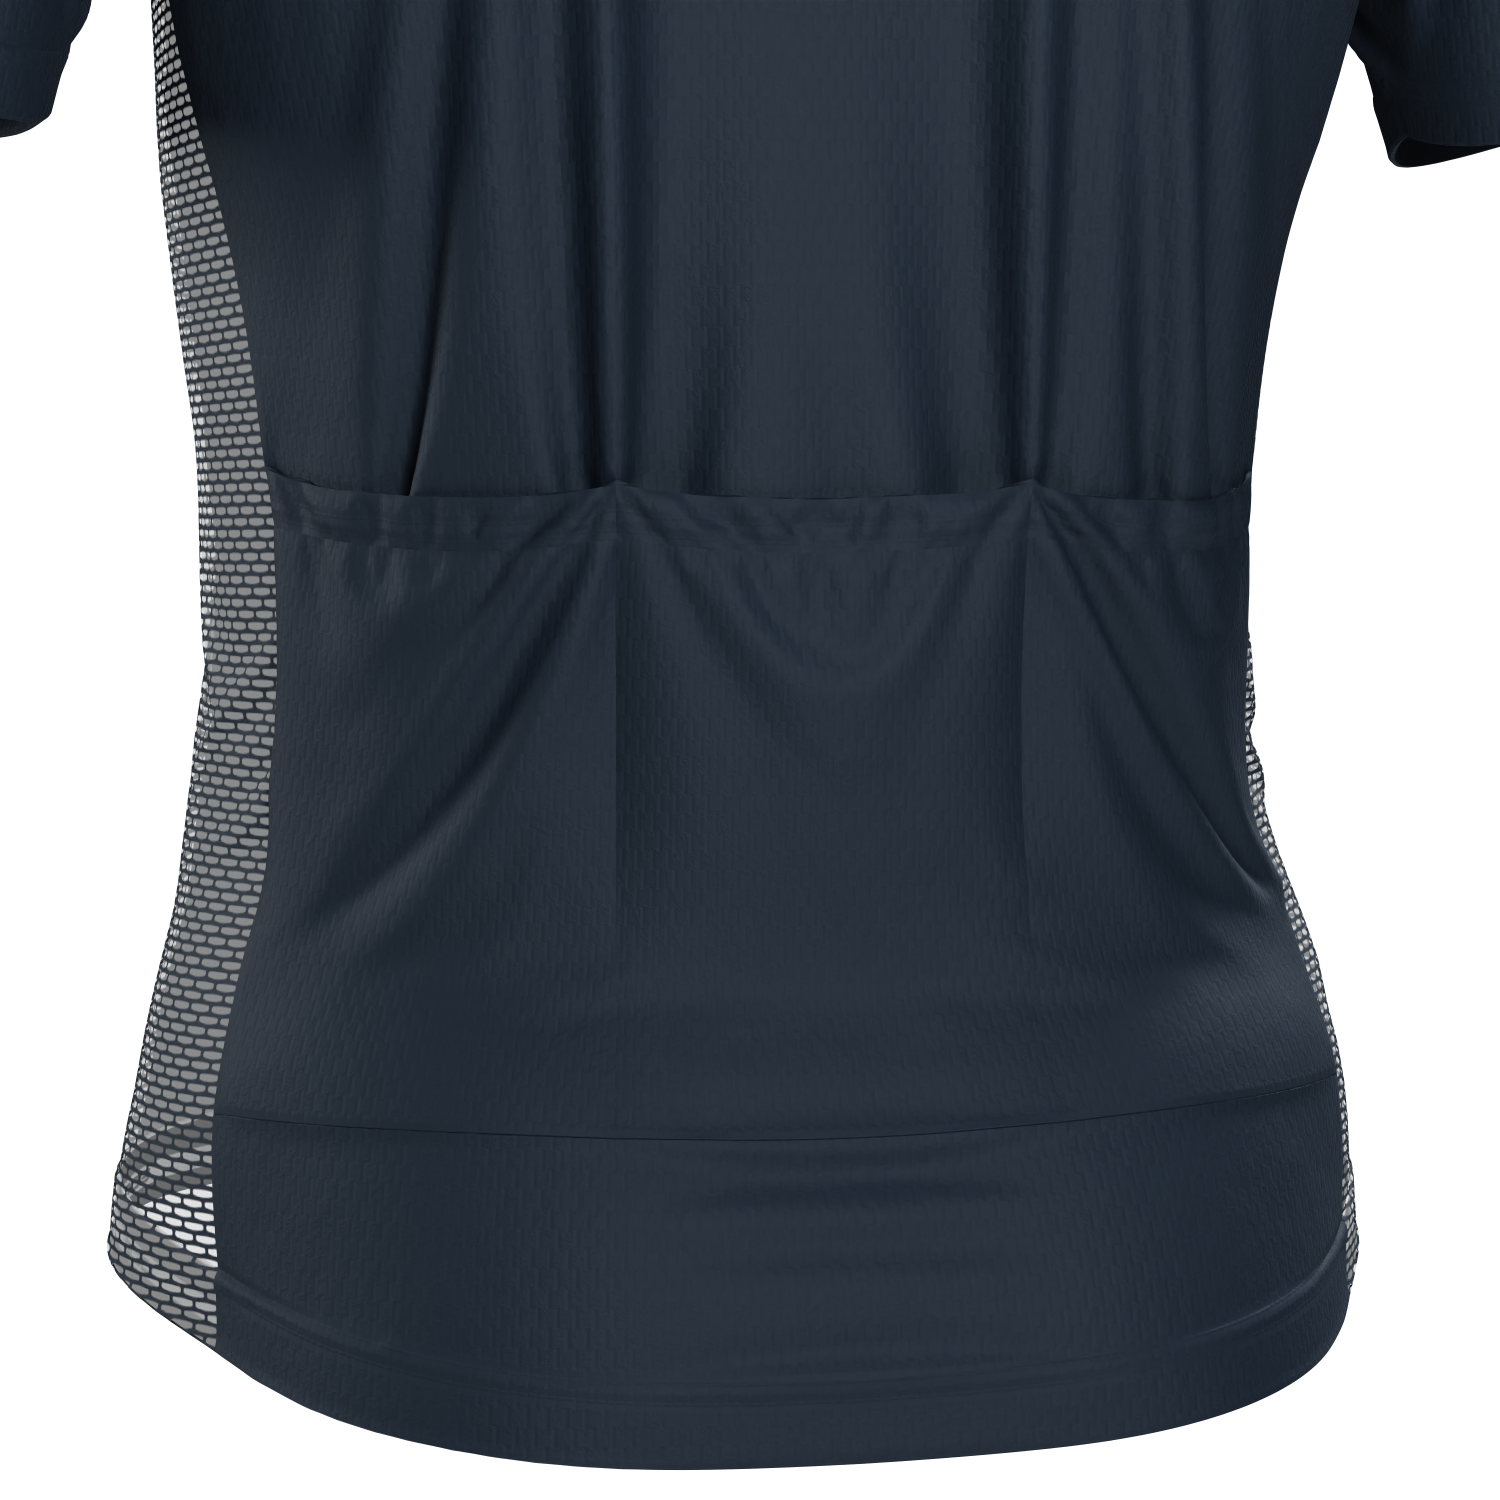 Men's Saddle Up, Let's Roll In Style! Short Sleeve Cycling Jersey